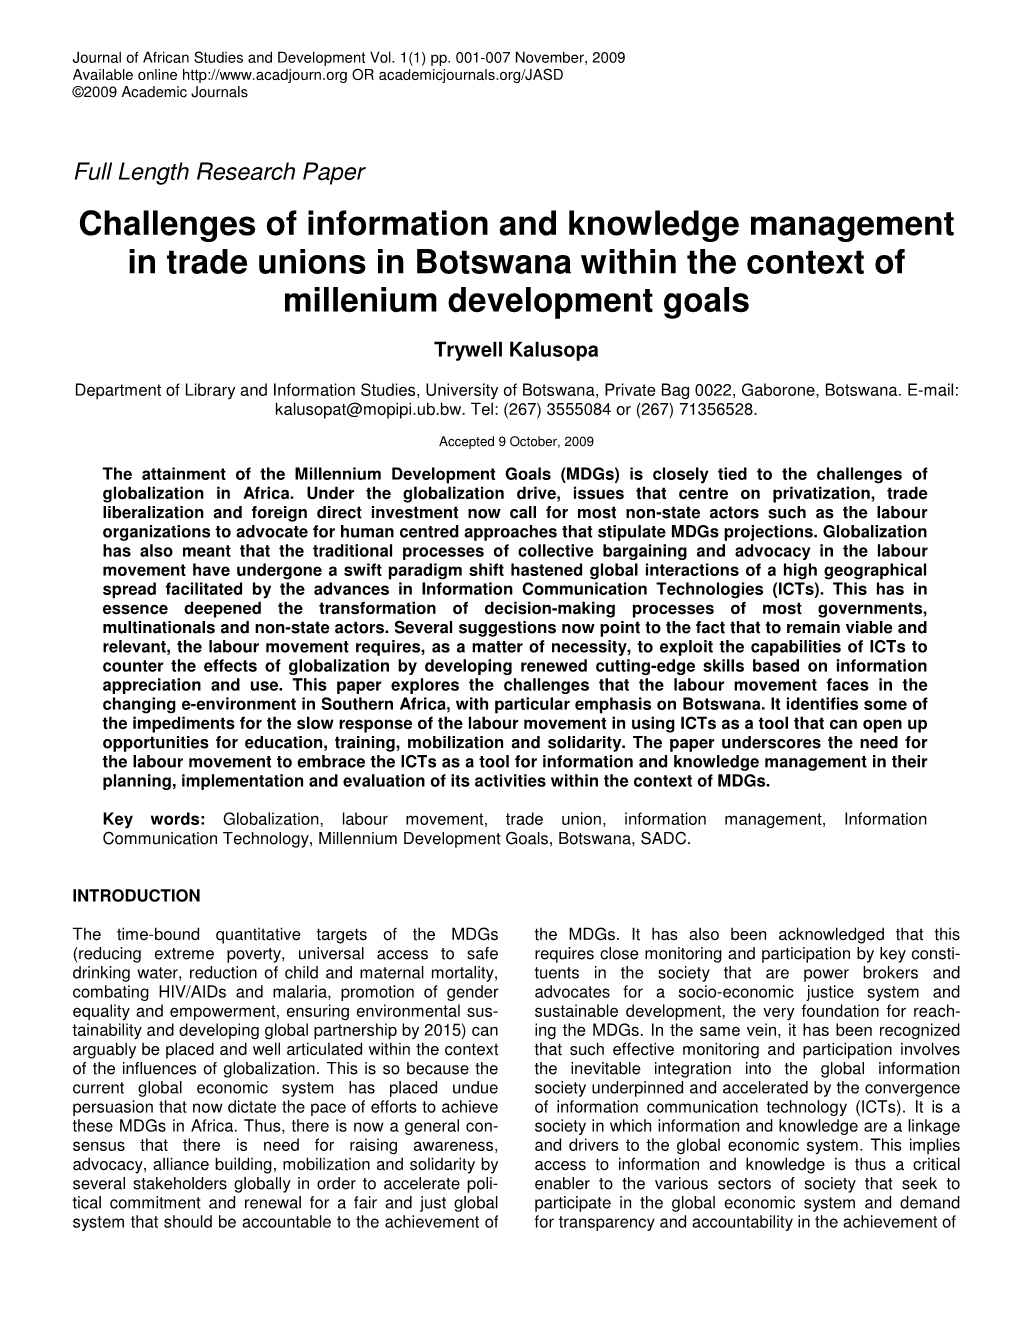 Challenges of Information and Knowledge Management in Trade Unions in Botswana Within the Context of Millenium Development Goals